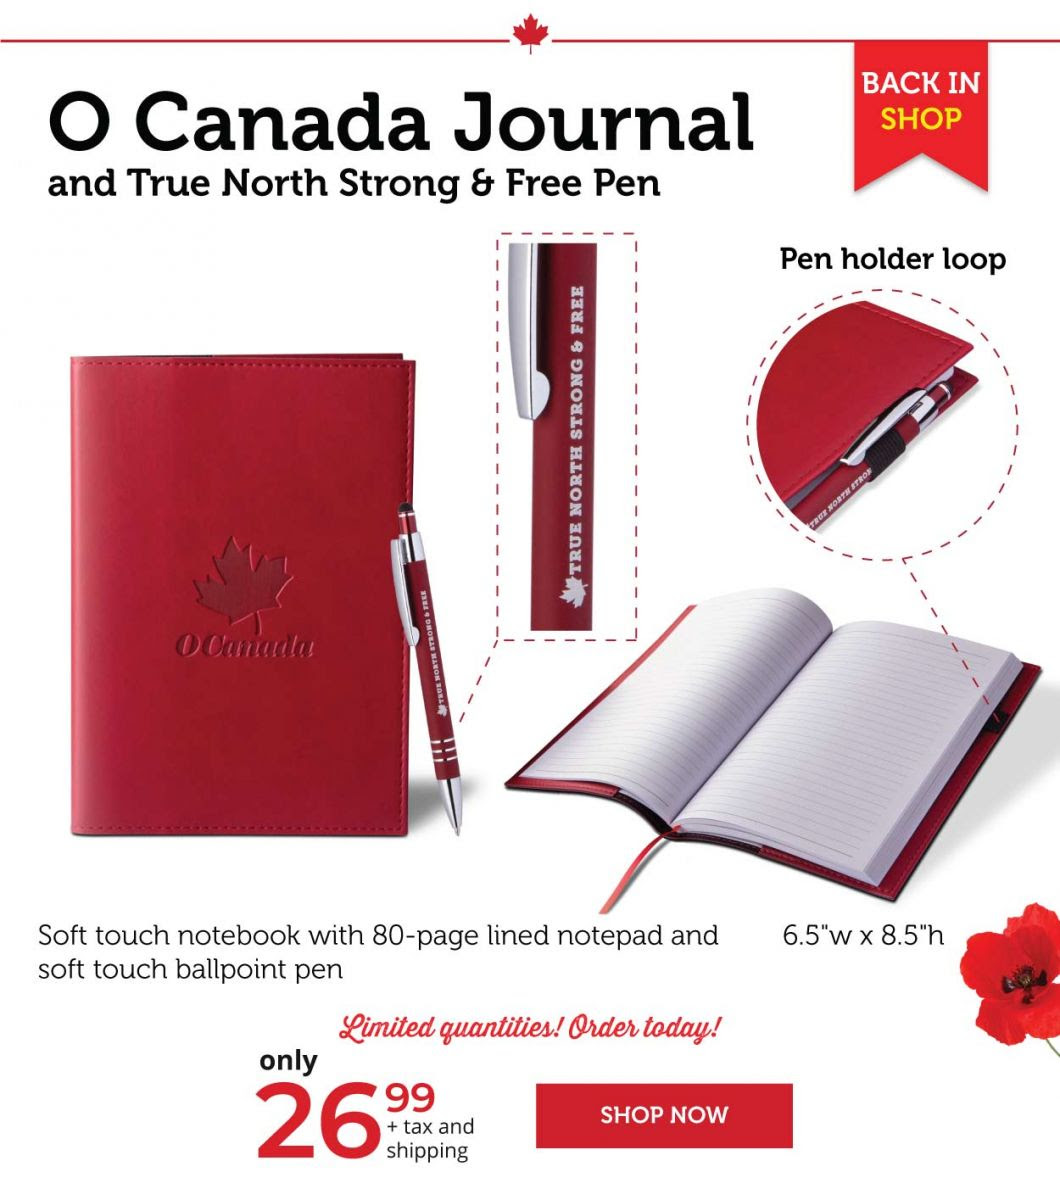 O Canada Journal and Pen